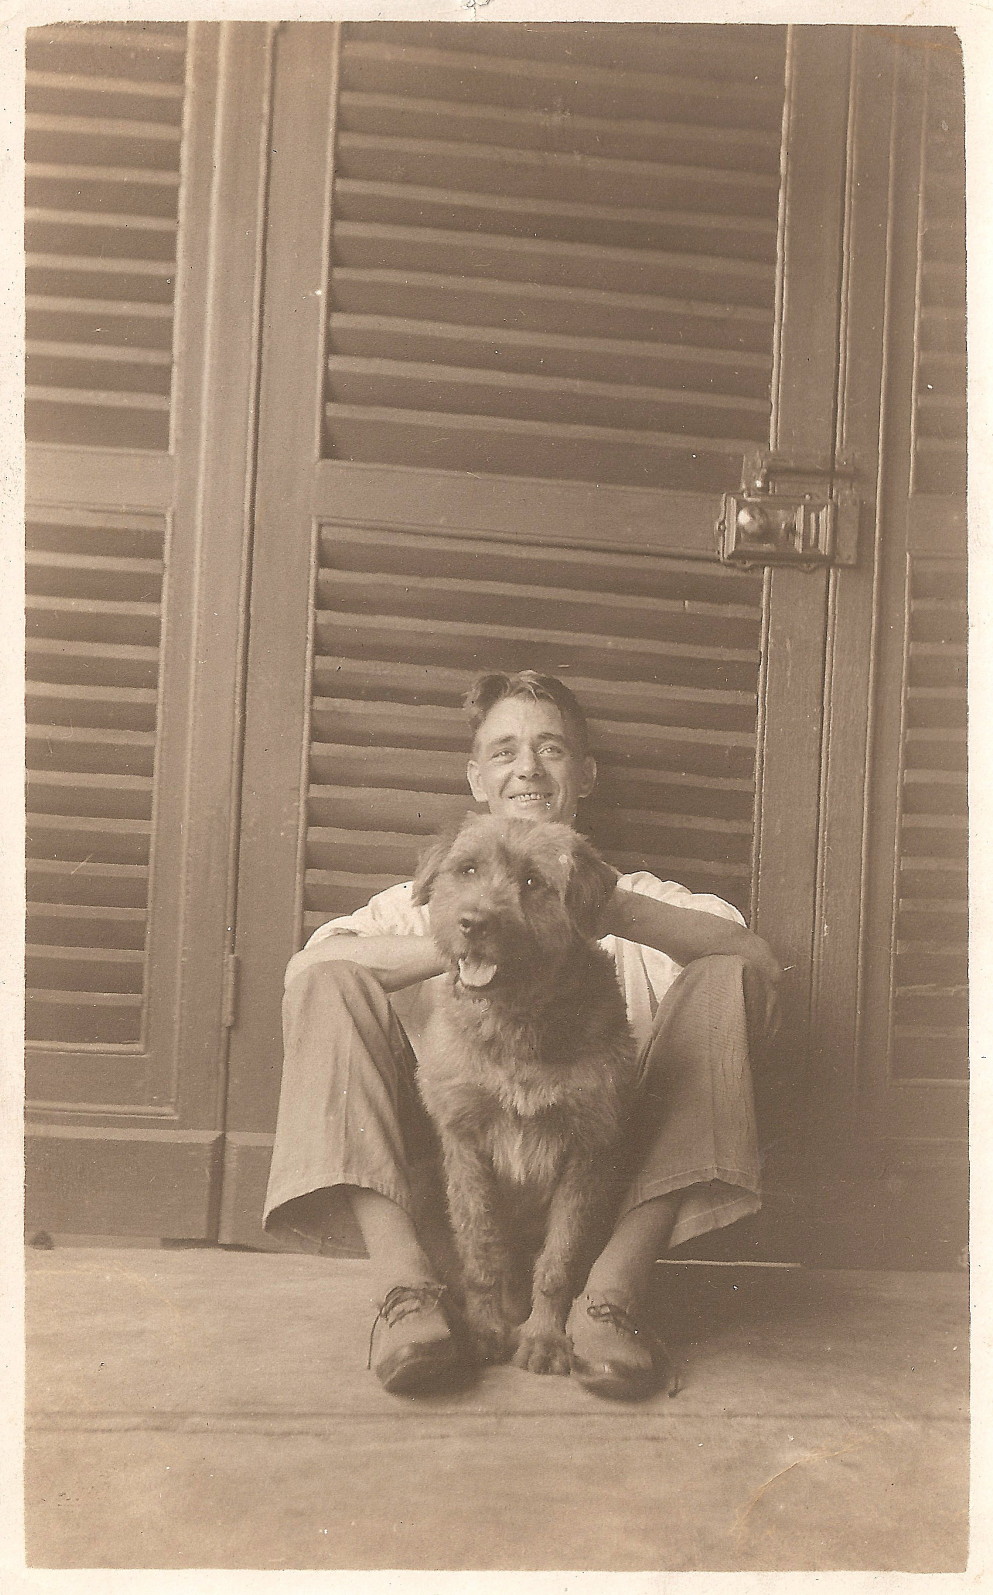 young man in a white shirt, pale floppy trousers and sandals, sitting on the ground in front of a slatted door, with a large shaggy dog between his knees